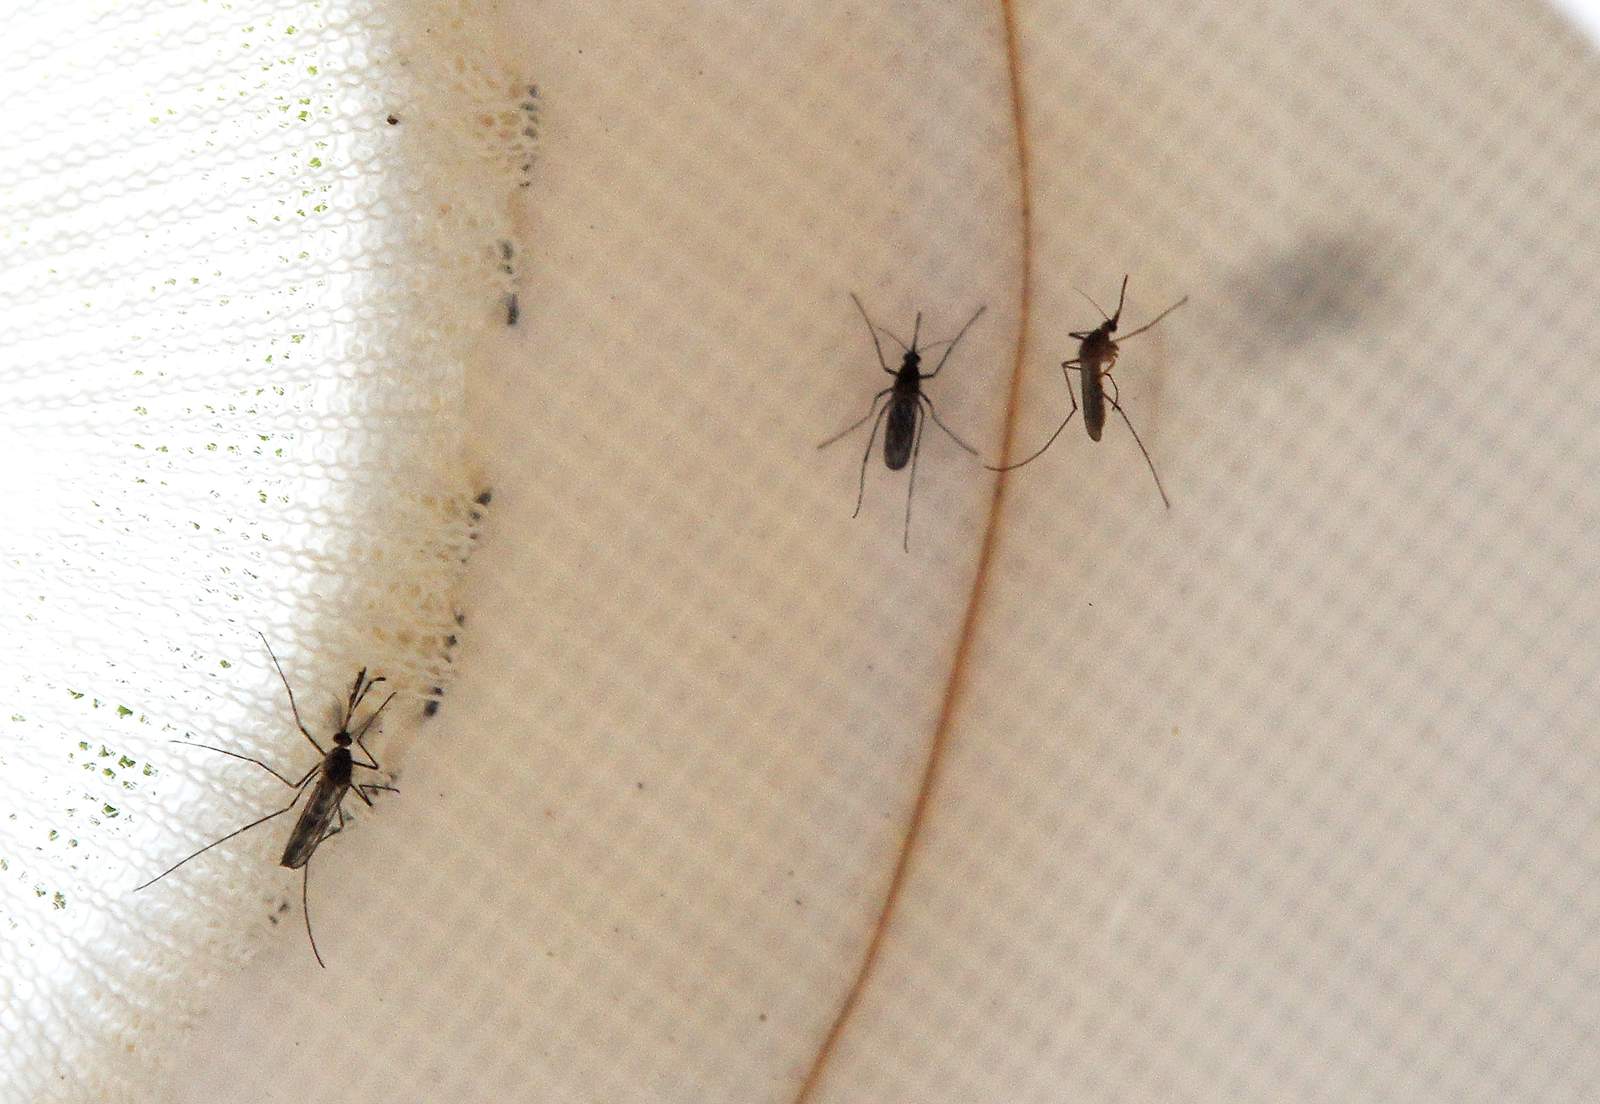 Health officials are treating a northwest Harris County area after West Nile Virus mosquitos discovered Tuesday